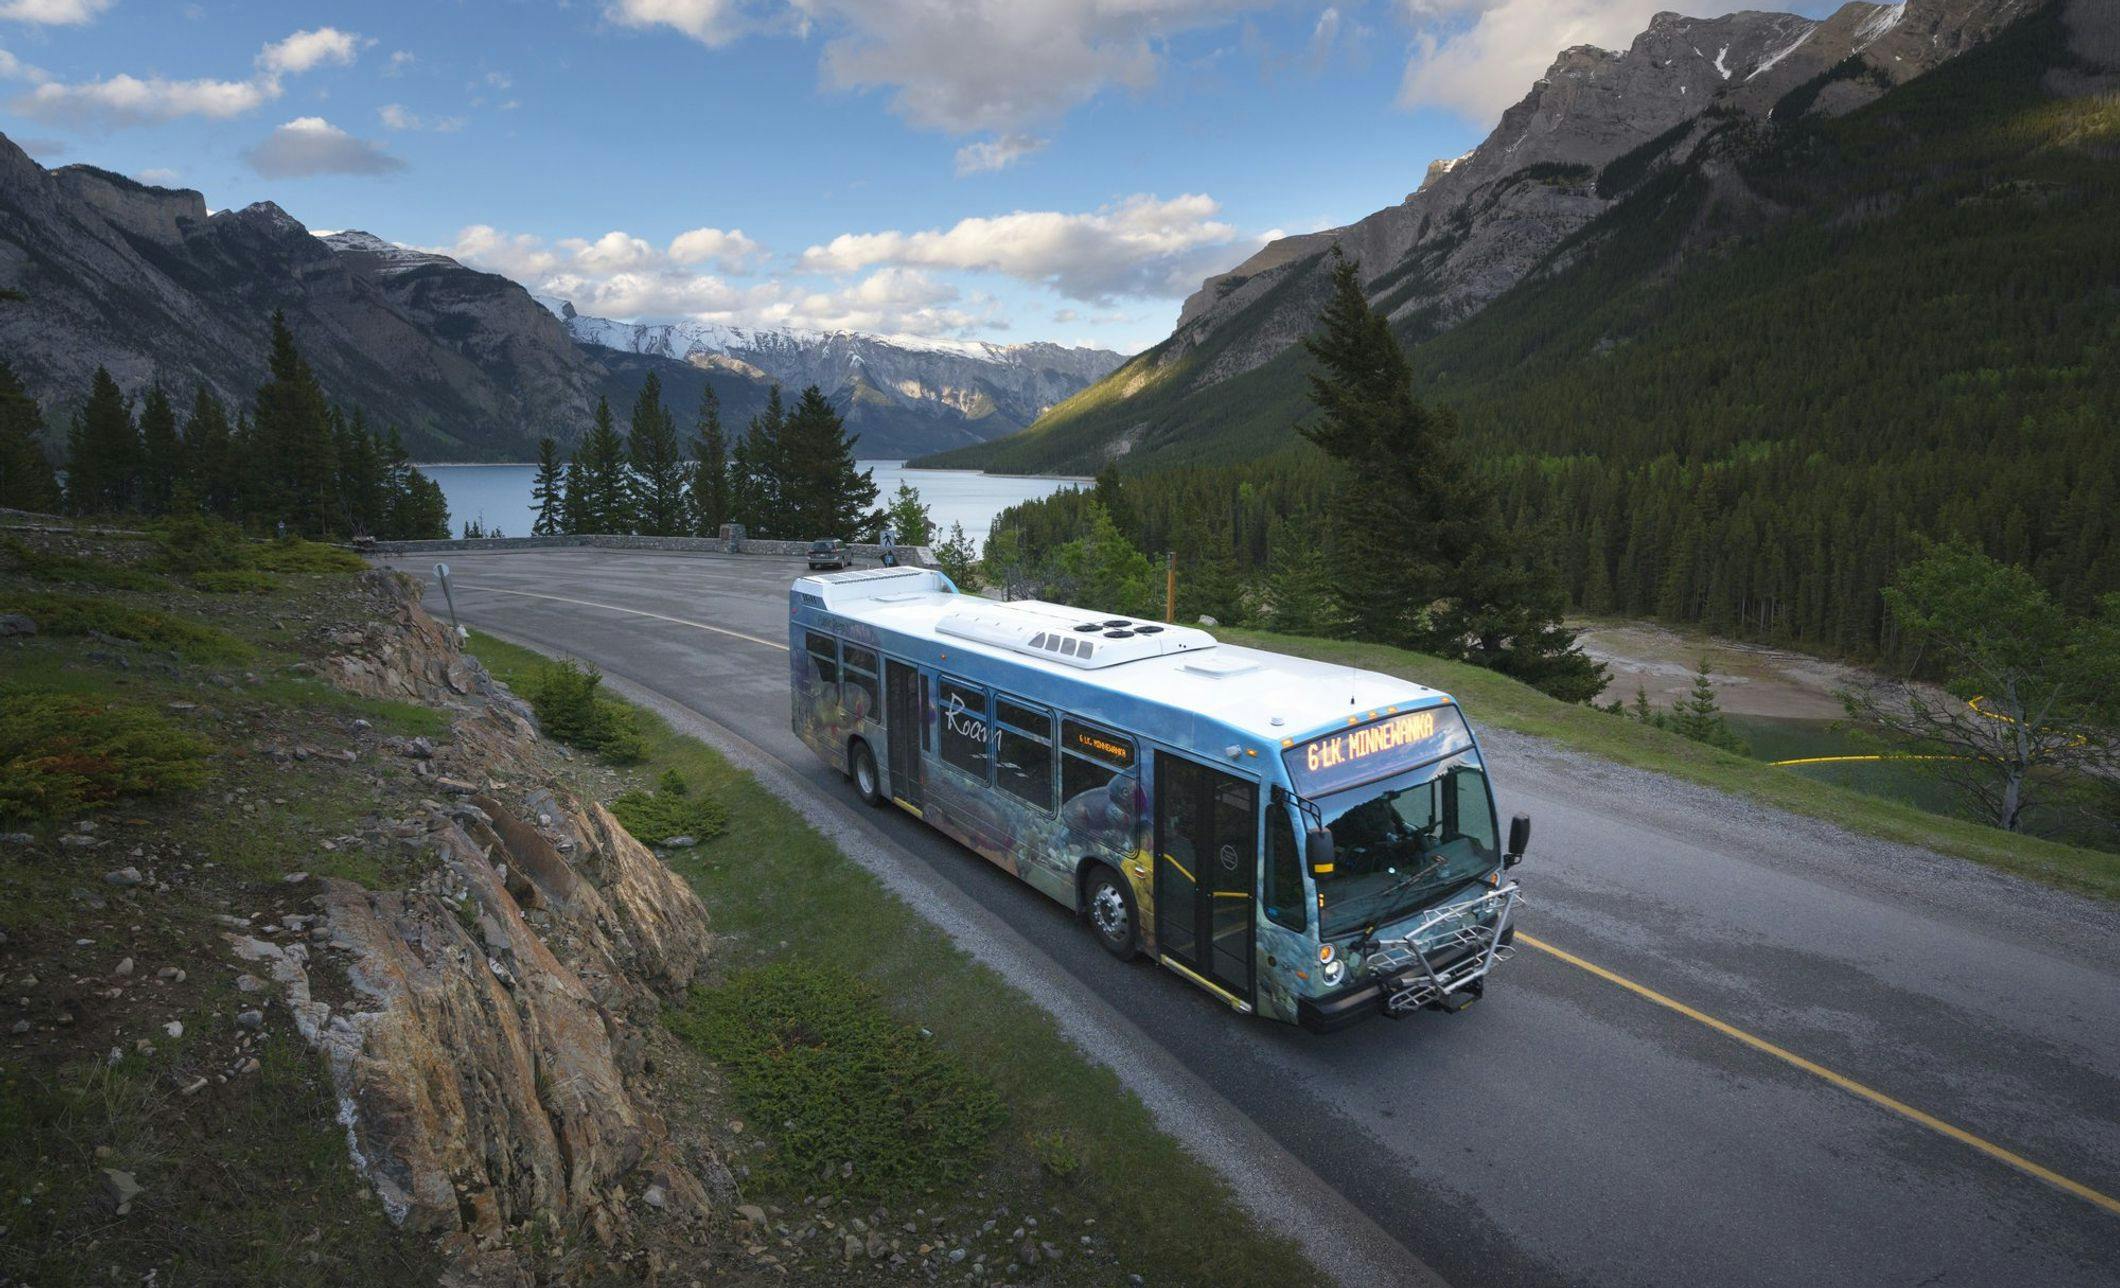 A public bus travels along a road with mountains and blue lakes in the background on a sunny summer day